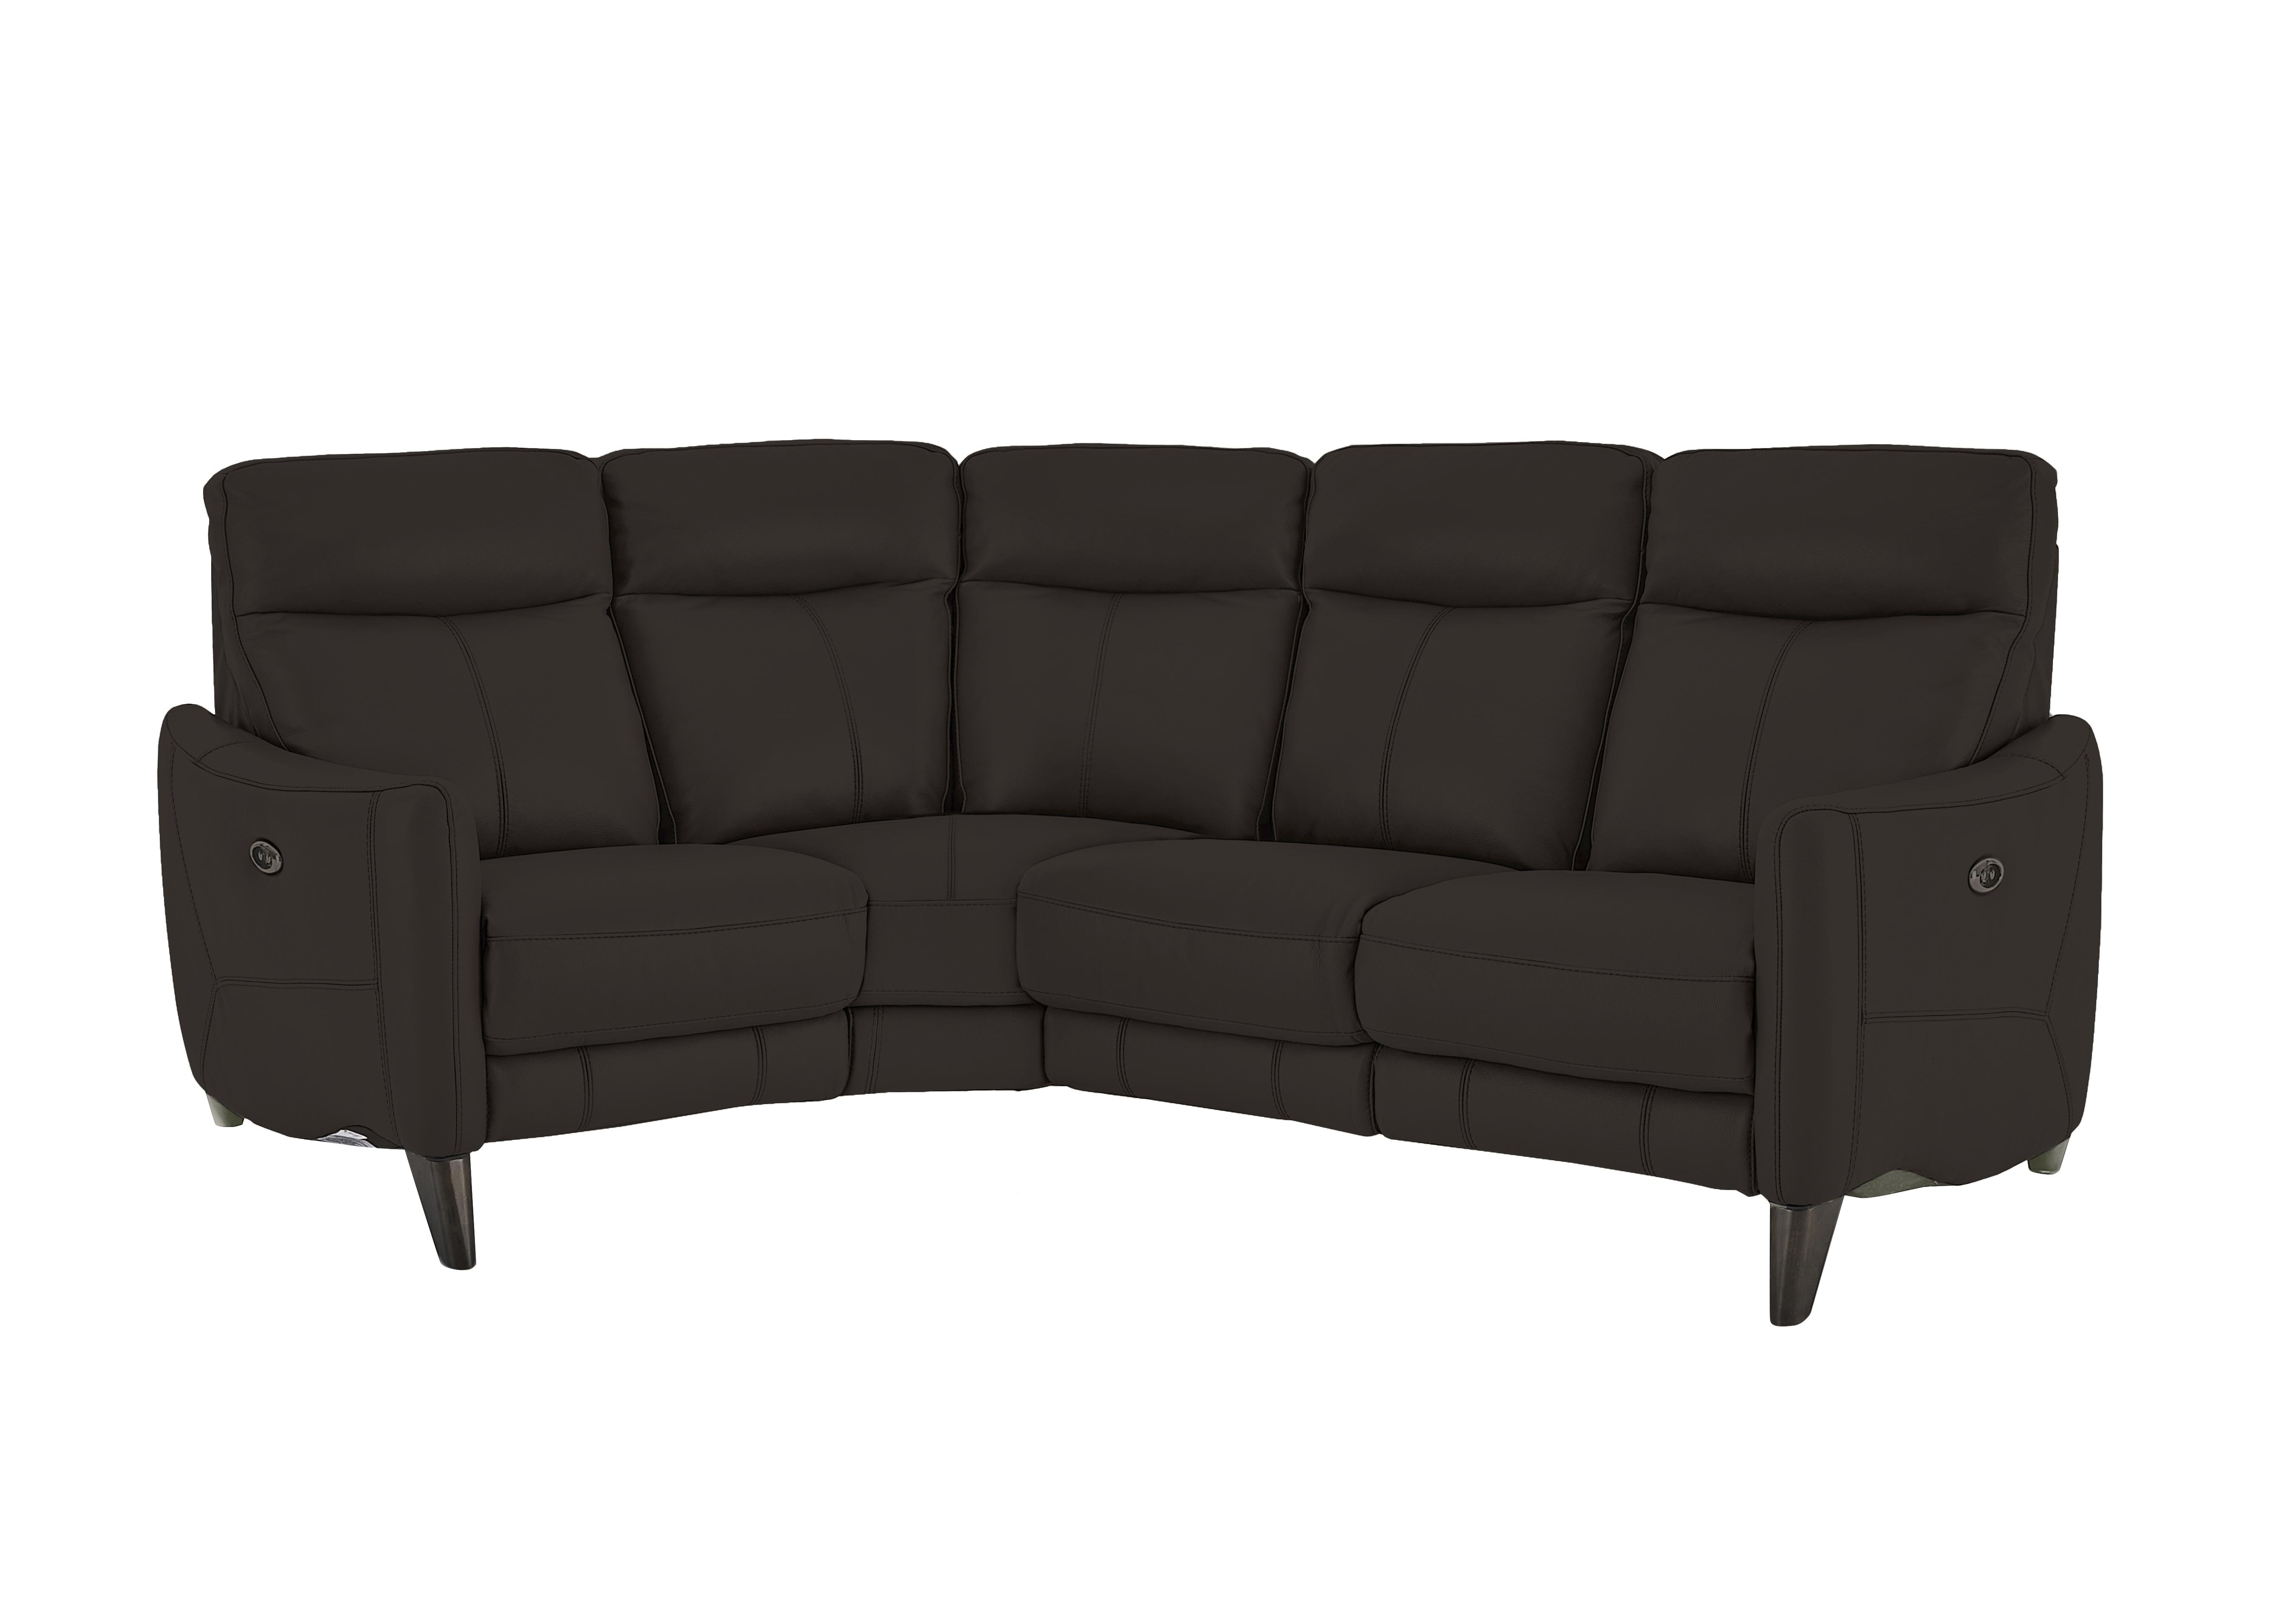 Compact Collection Petit Leather Corner Sofa in Bv-1748 Dark Chocolate on Furniture Village